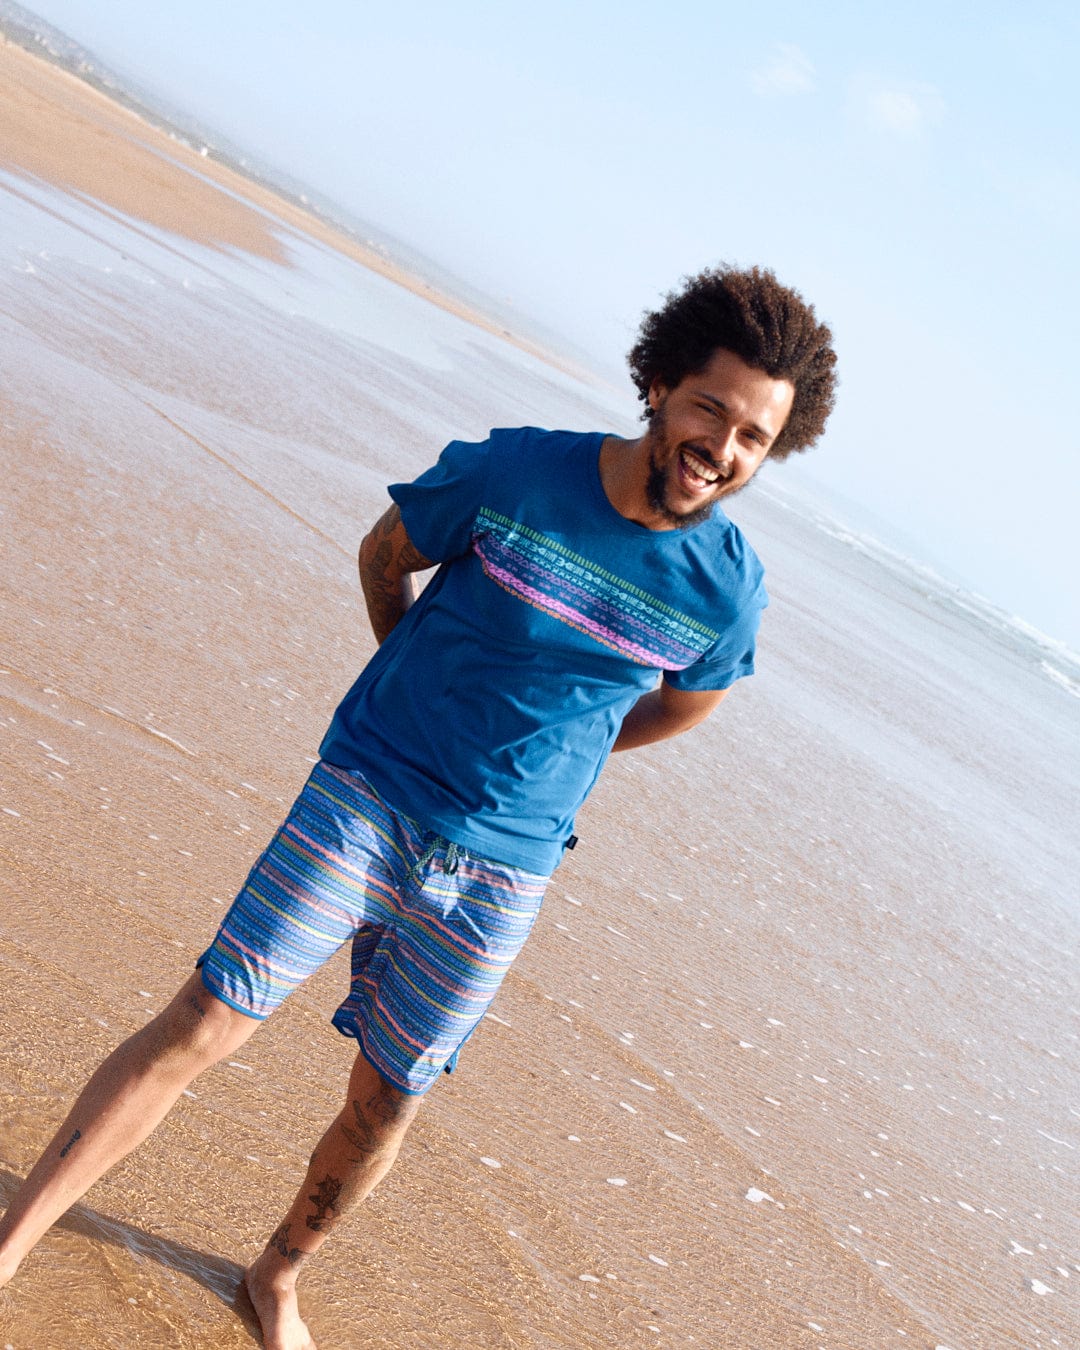 Man with curly hair and tattoos smiles while walking on a beach, wearing a Saltrock Marks Chest Mens Short Sleeve T-Shirt in Blue and shorts.